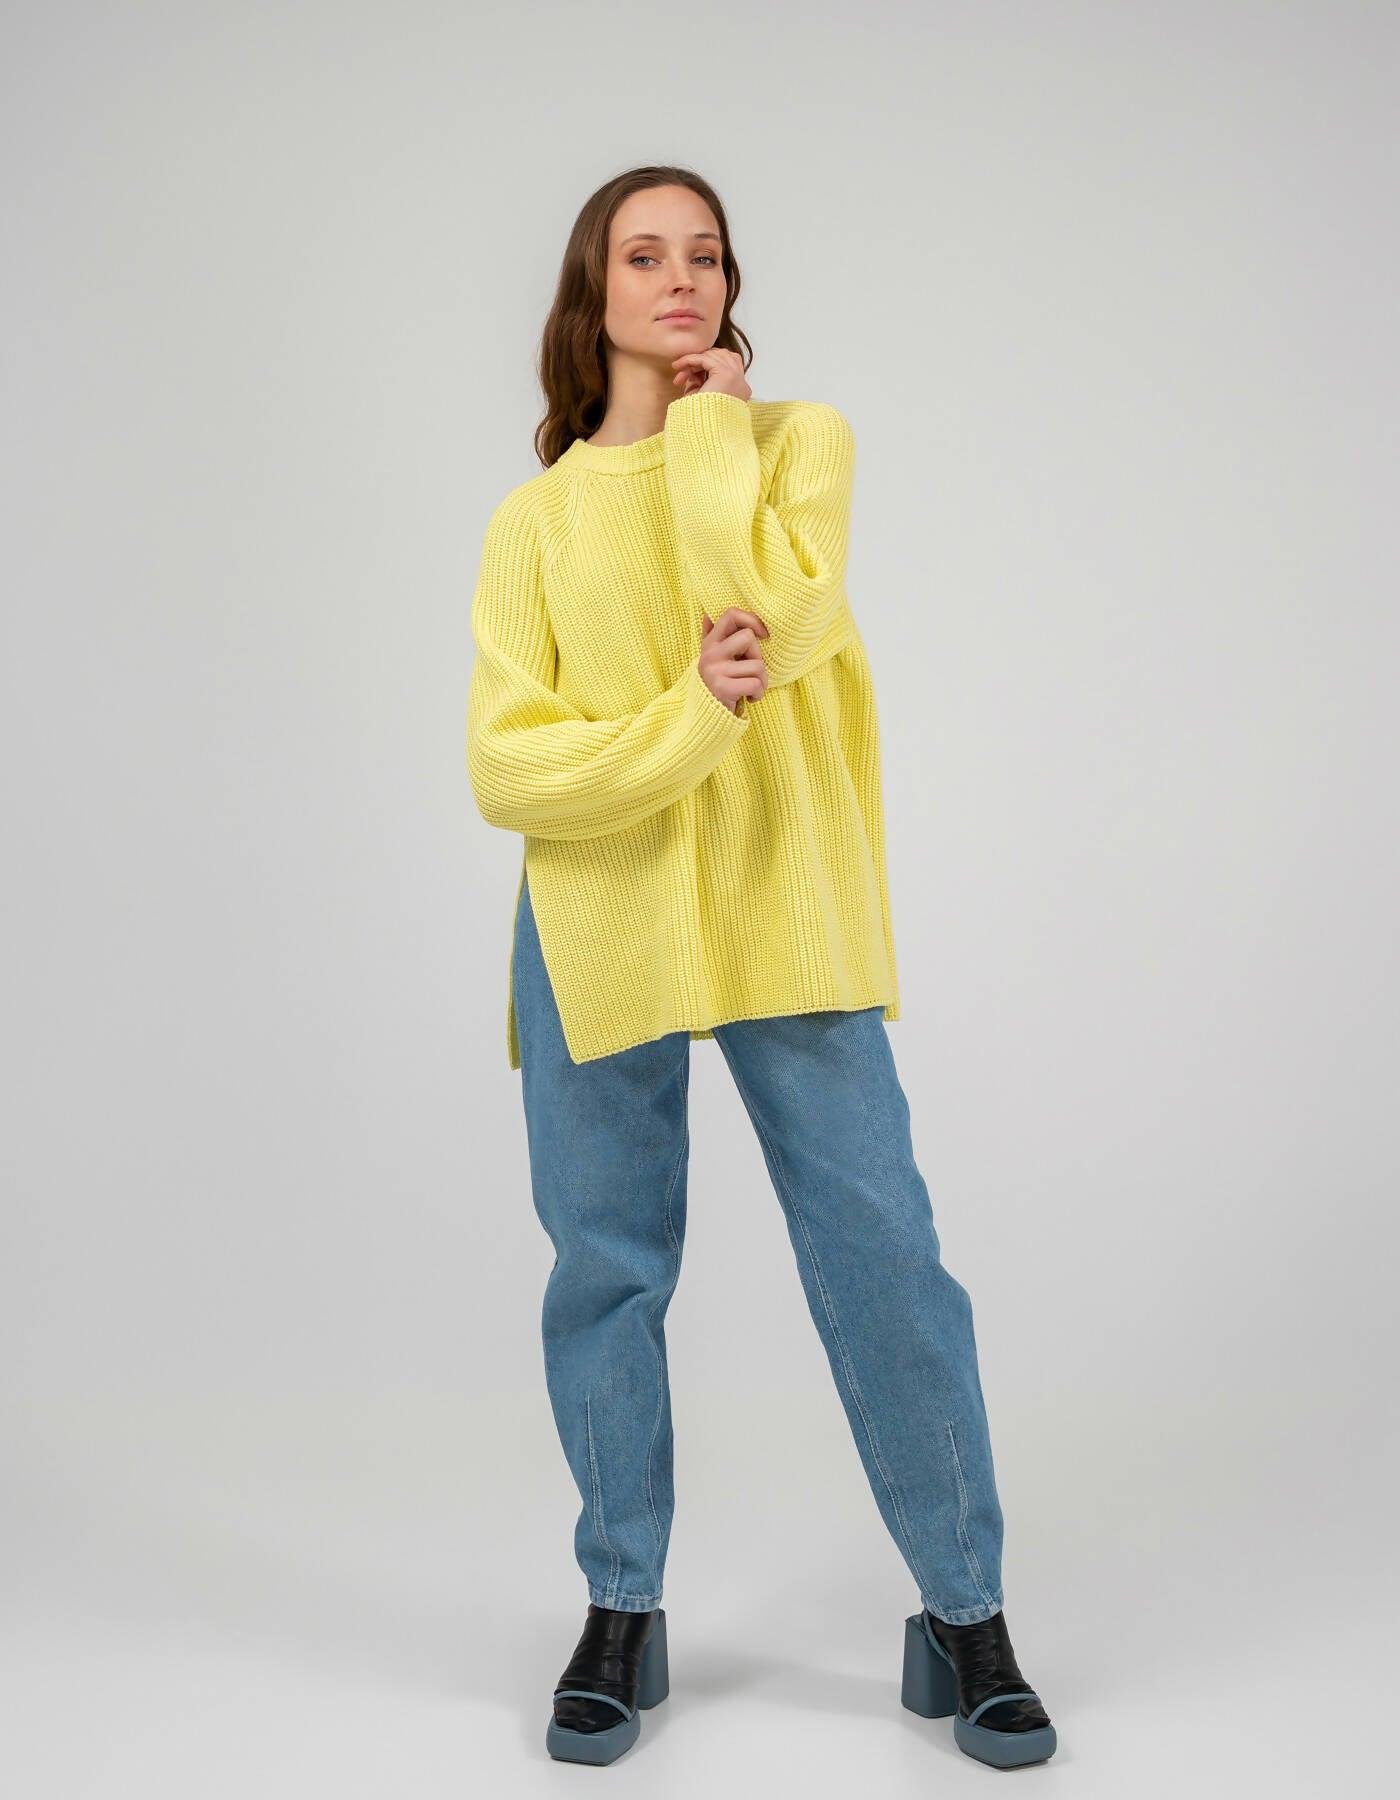 Slit Sweater Yellow by 7/11 SEVEN ELEVEN